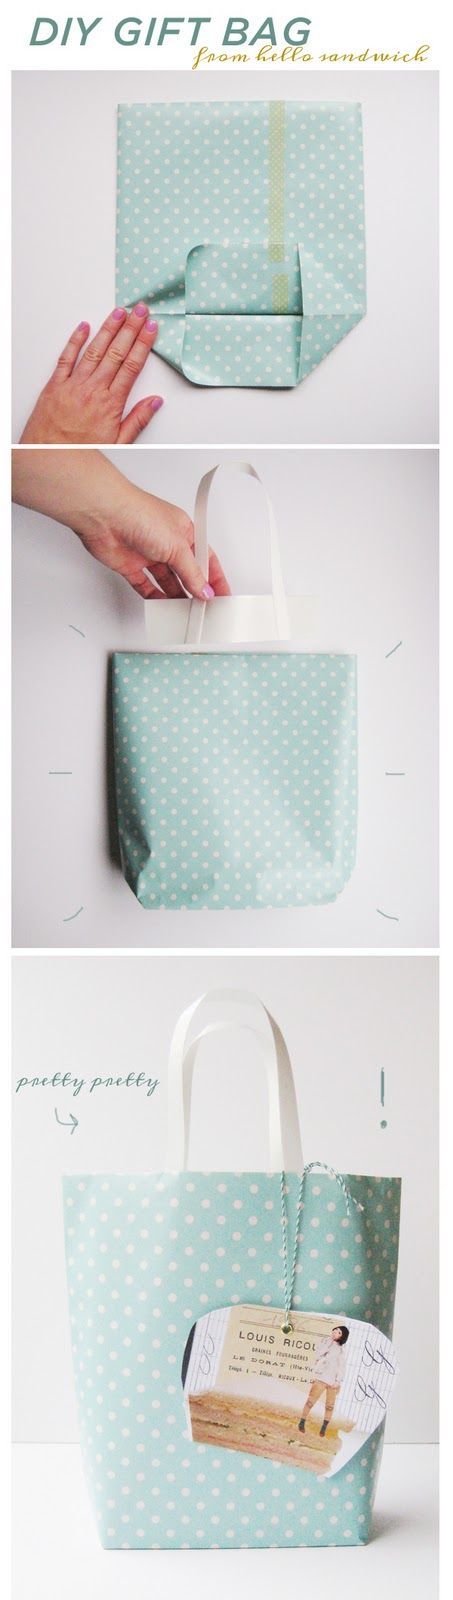 Make gift bags using wrapping paper. Perfect for those oddly shaped